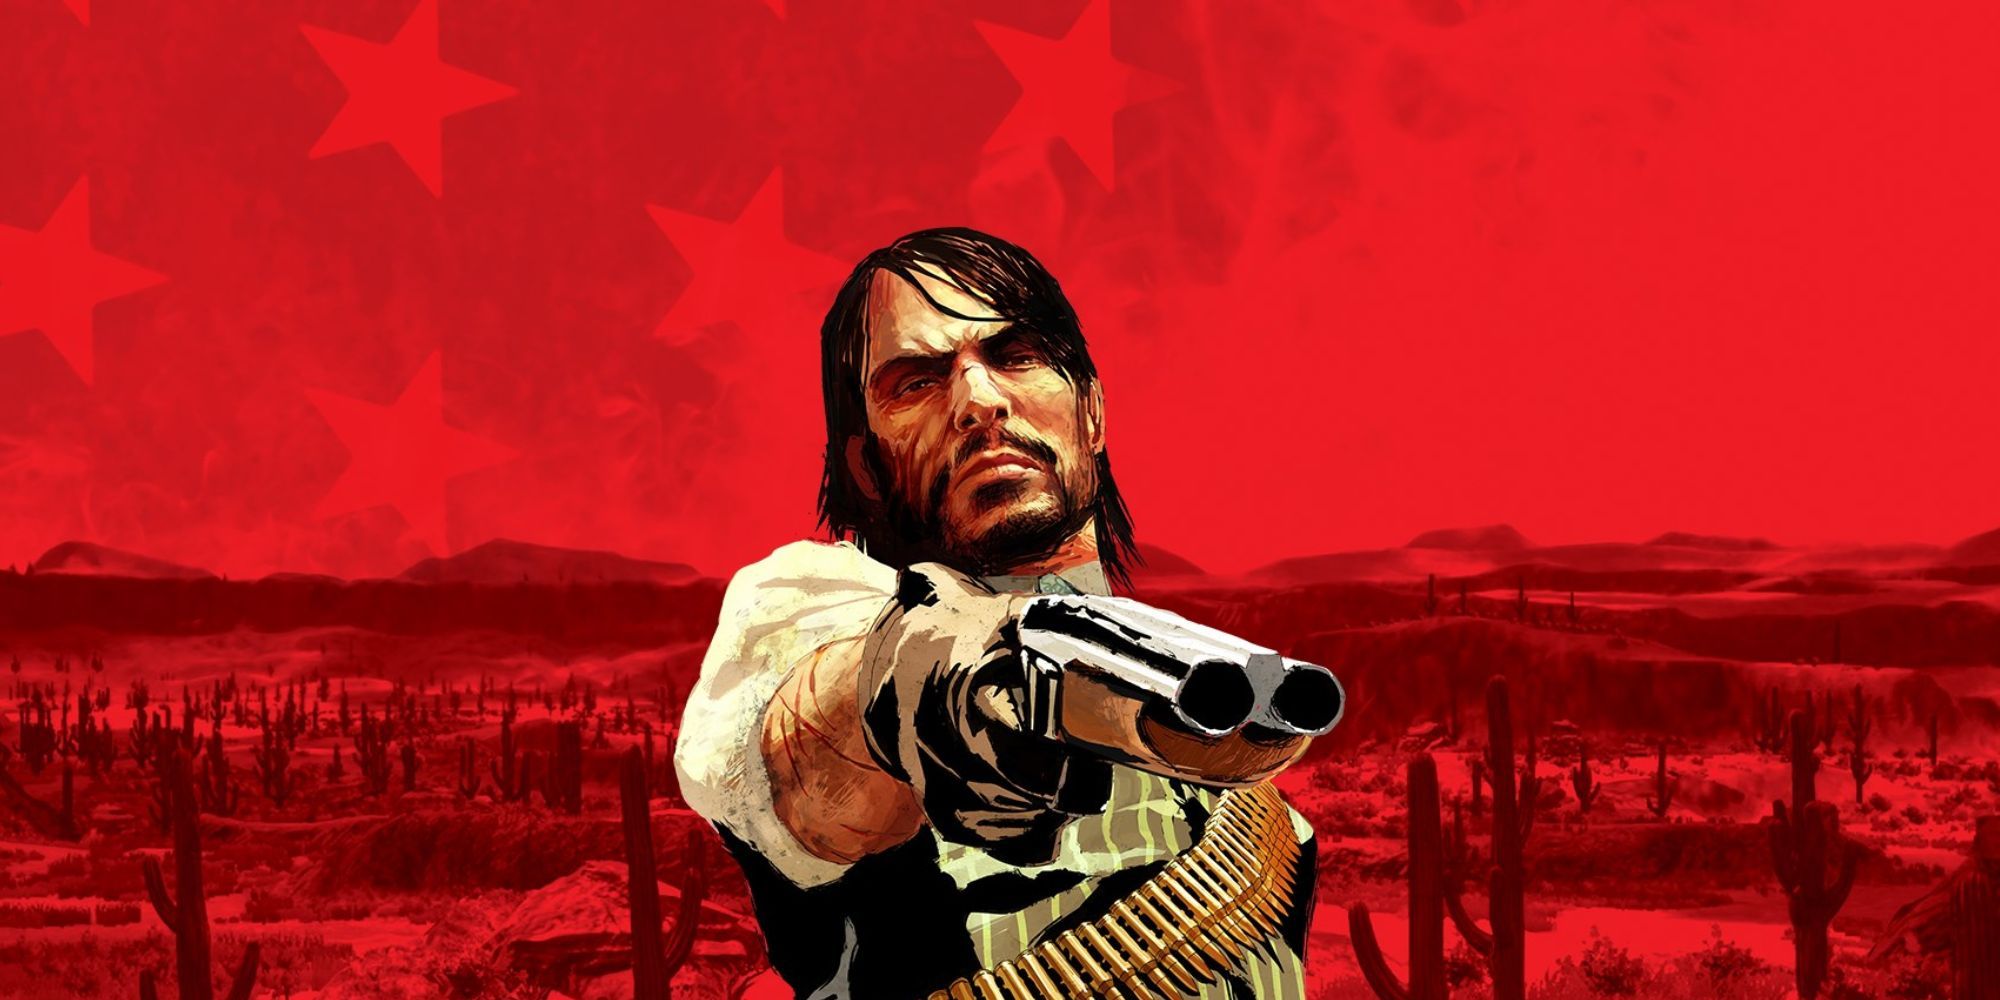 John marston pointing a gun with red background